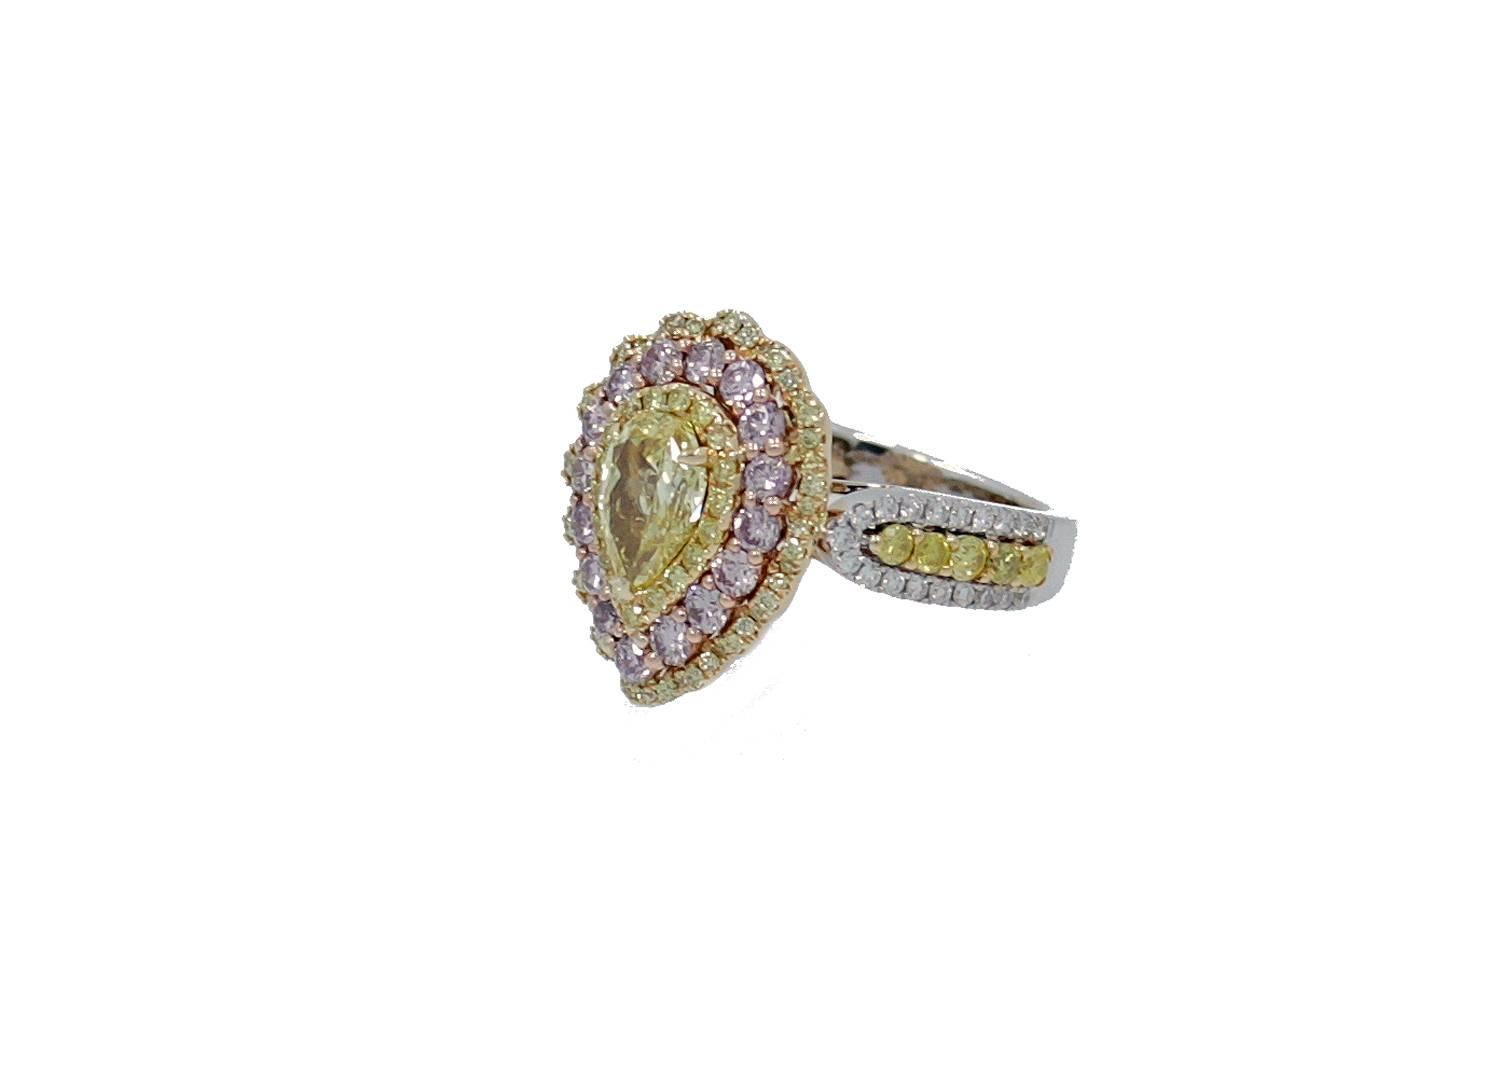 18K Yellow and Gold Ring with 1.05 carat Natural Pear Shape Fancy Intense Yellow (GIA Report#2105909286) center, 89 round brilliant yellow diamonds which equal .76 carats total; 16 Round Brilliant Pink Diamonds which equal .75 carats total;  and 38